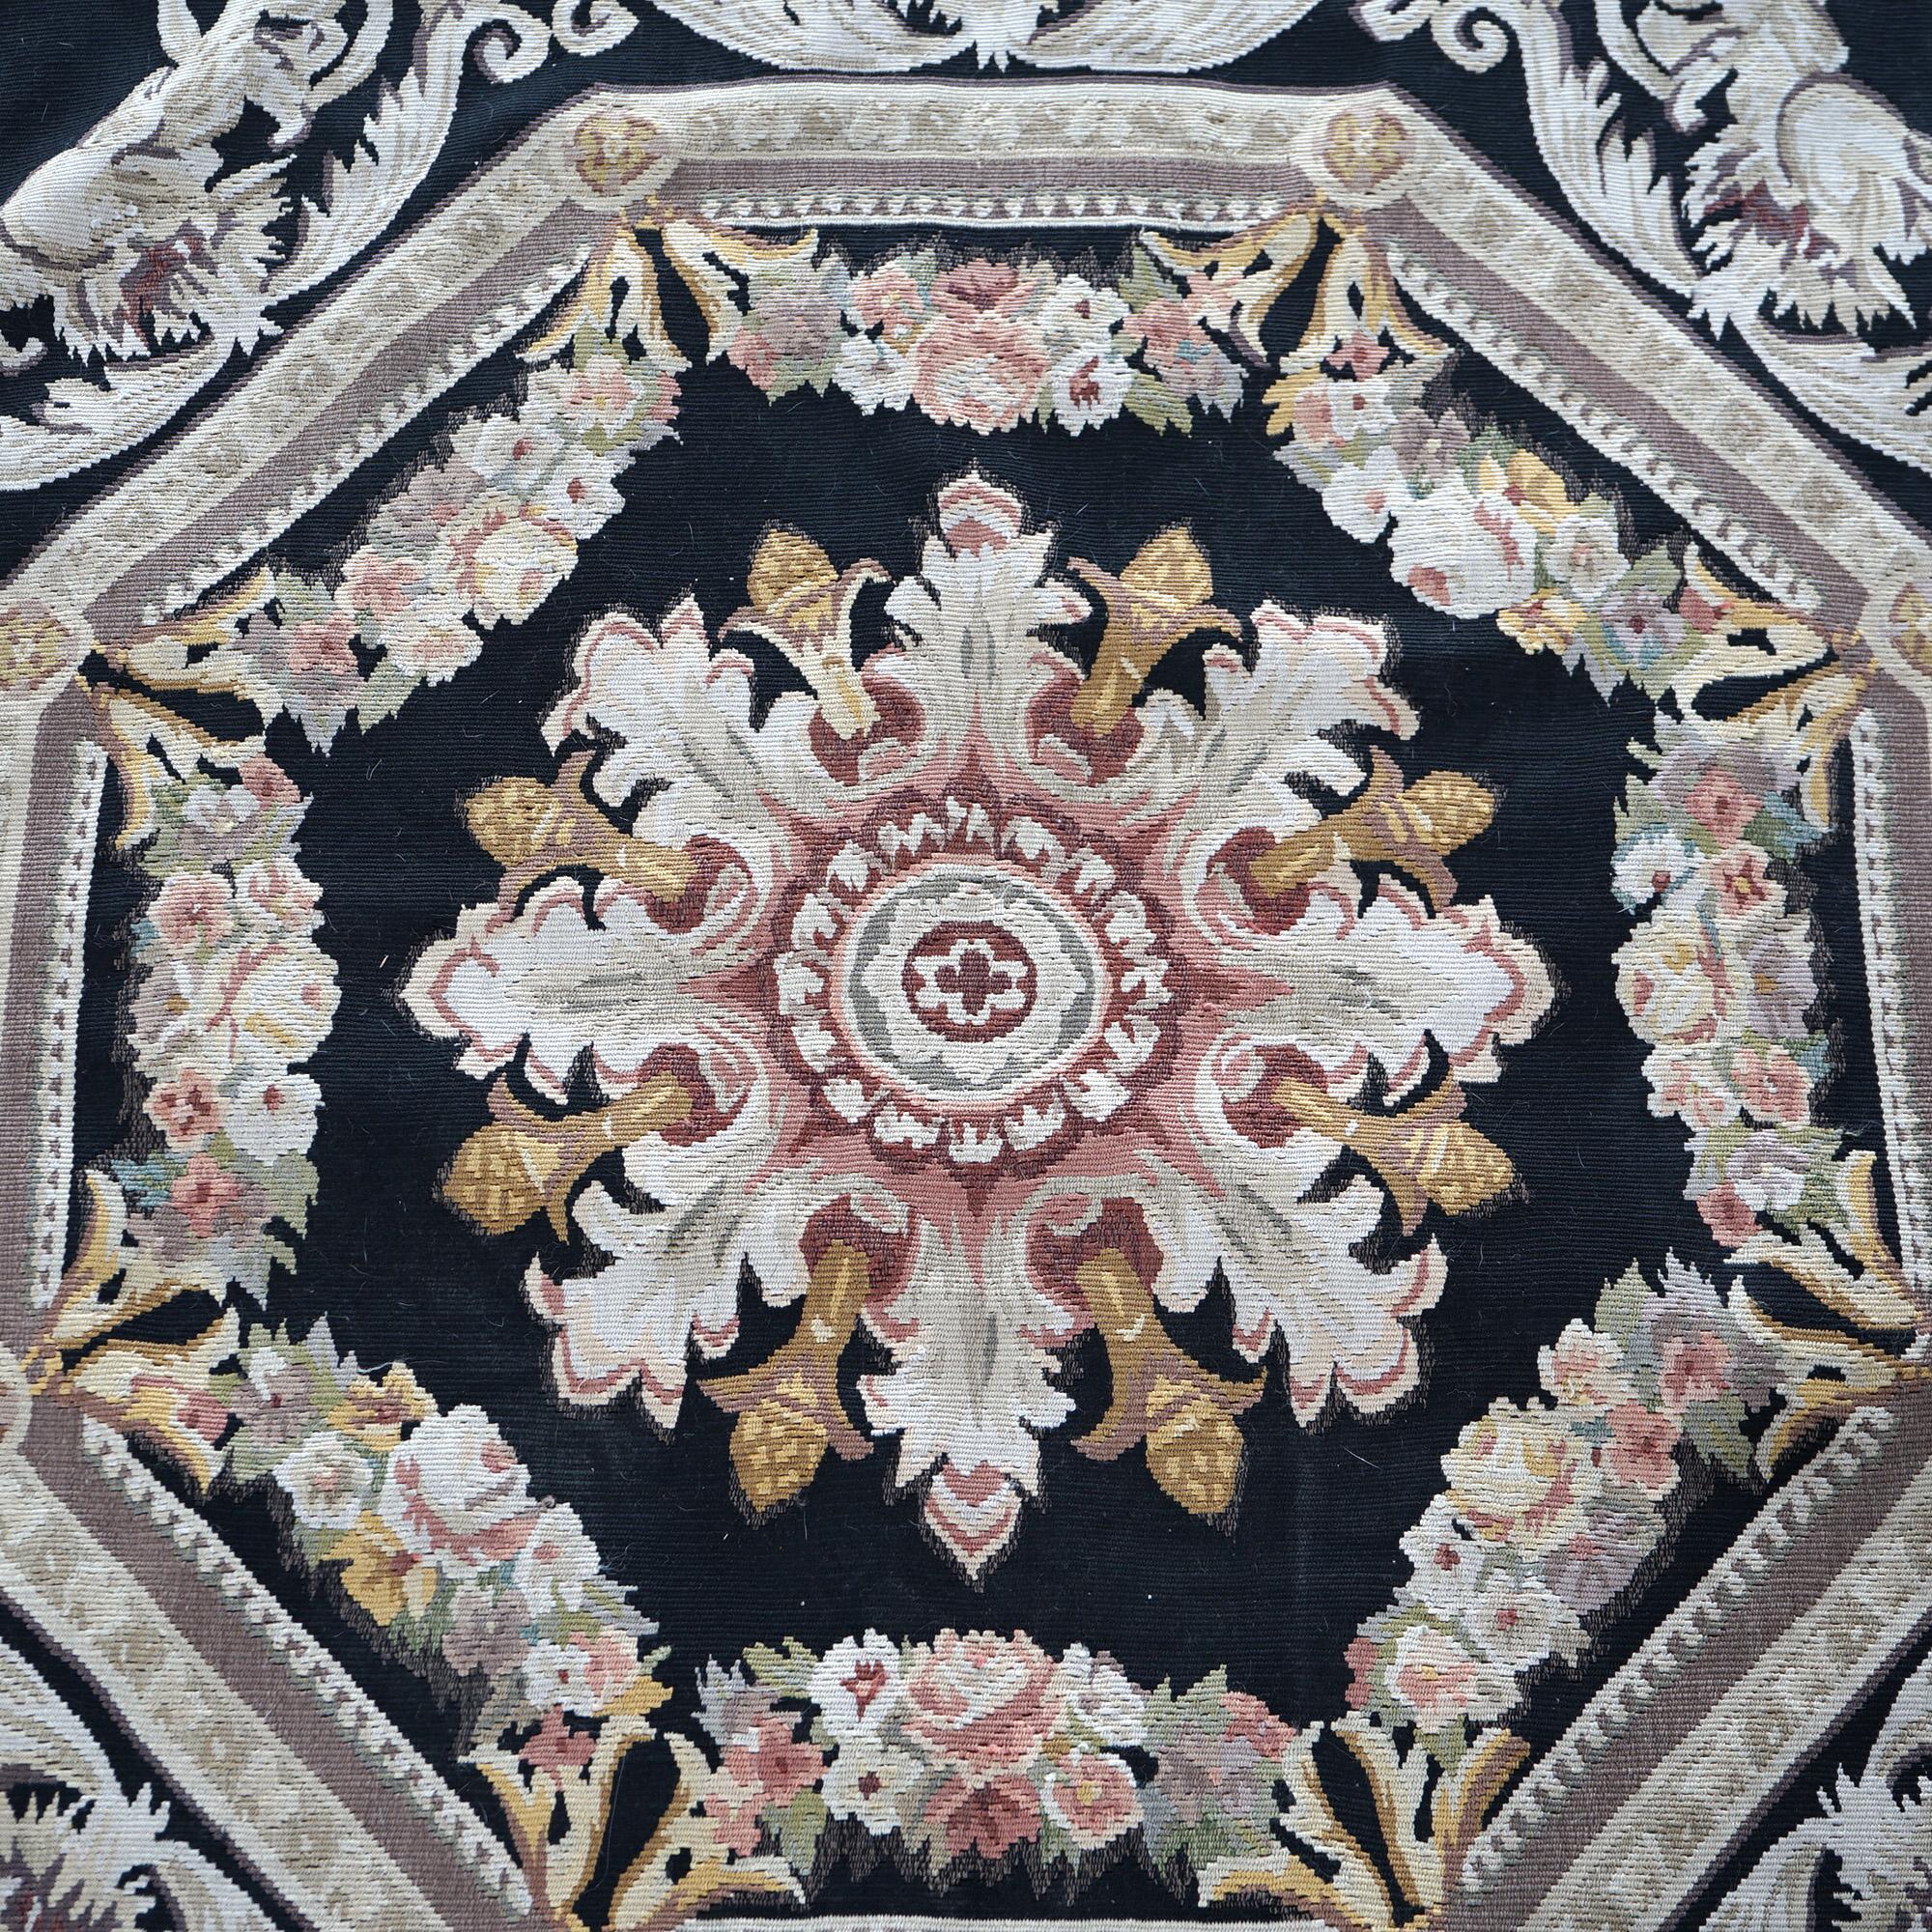 A French Aubusson rug offers wool needlepoint construction with  central medallion and foliate elements throughout, 20th C

Measures - 98